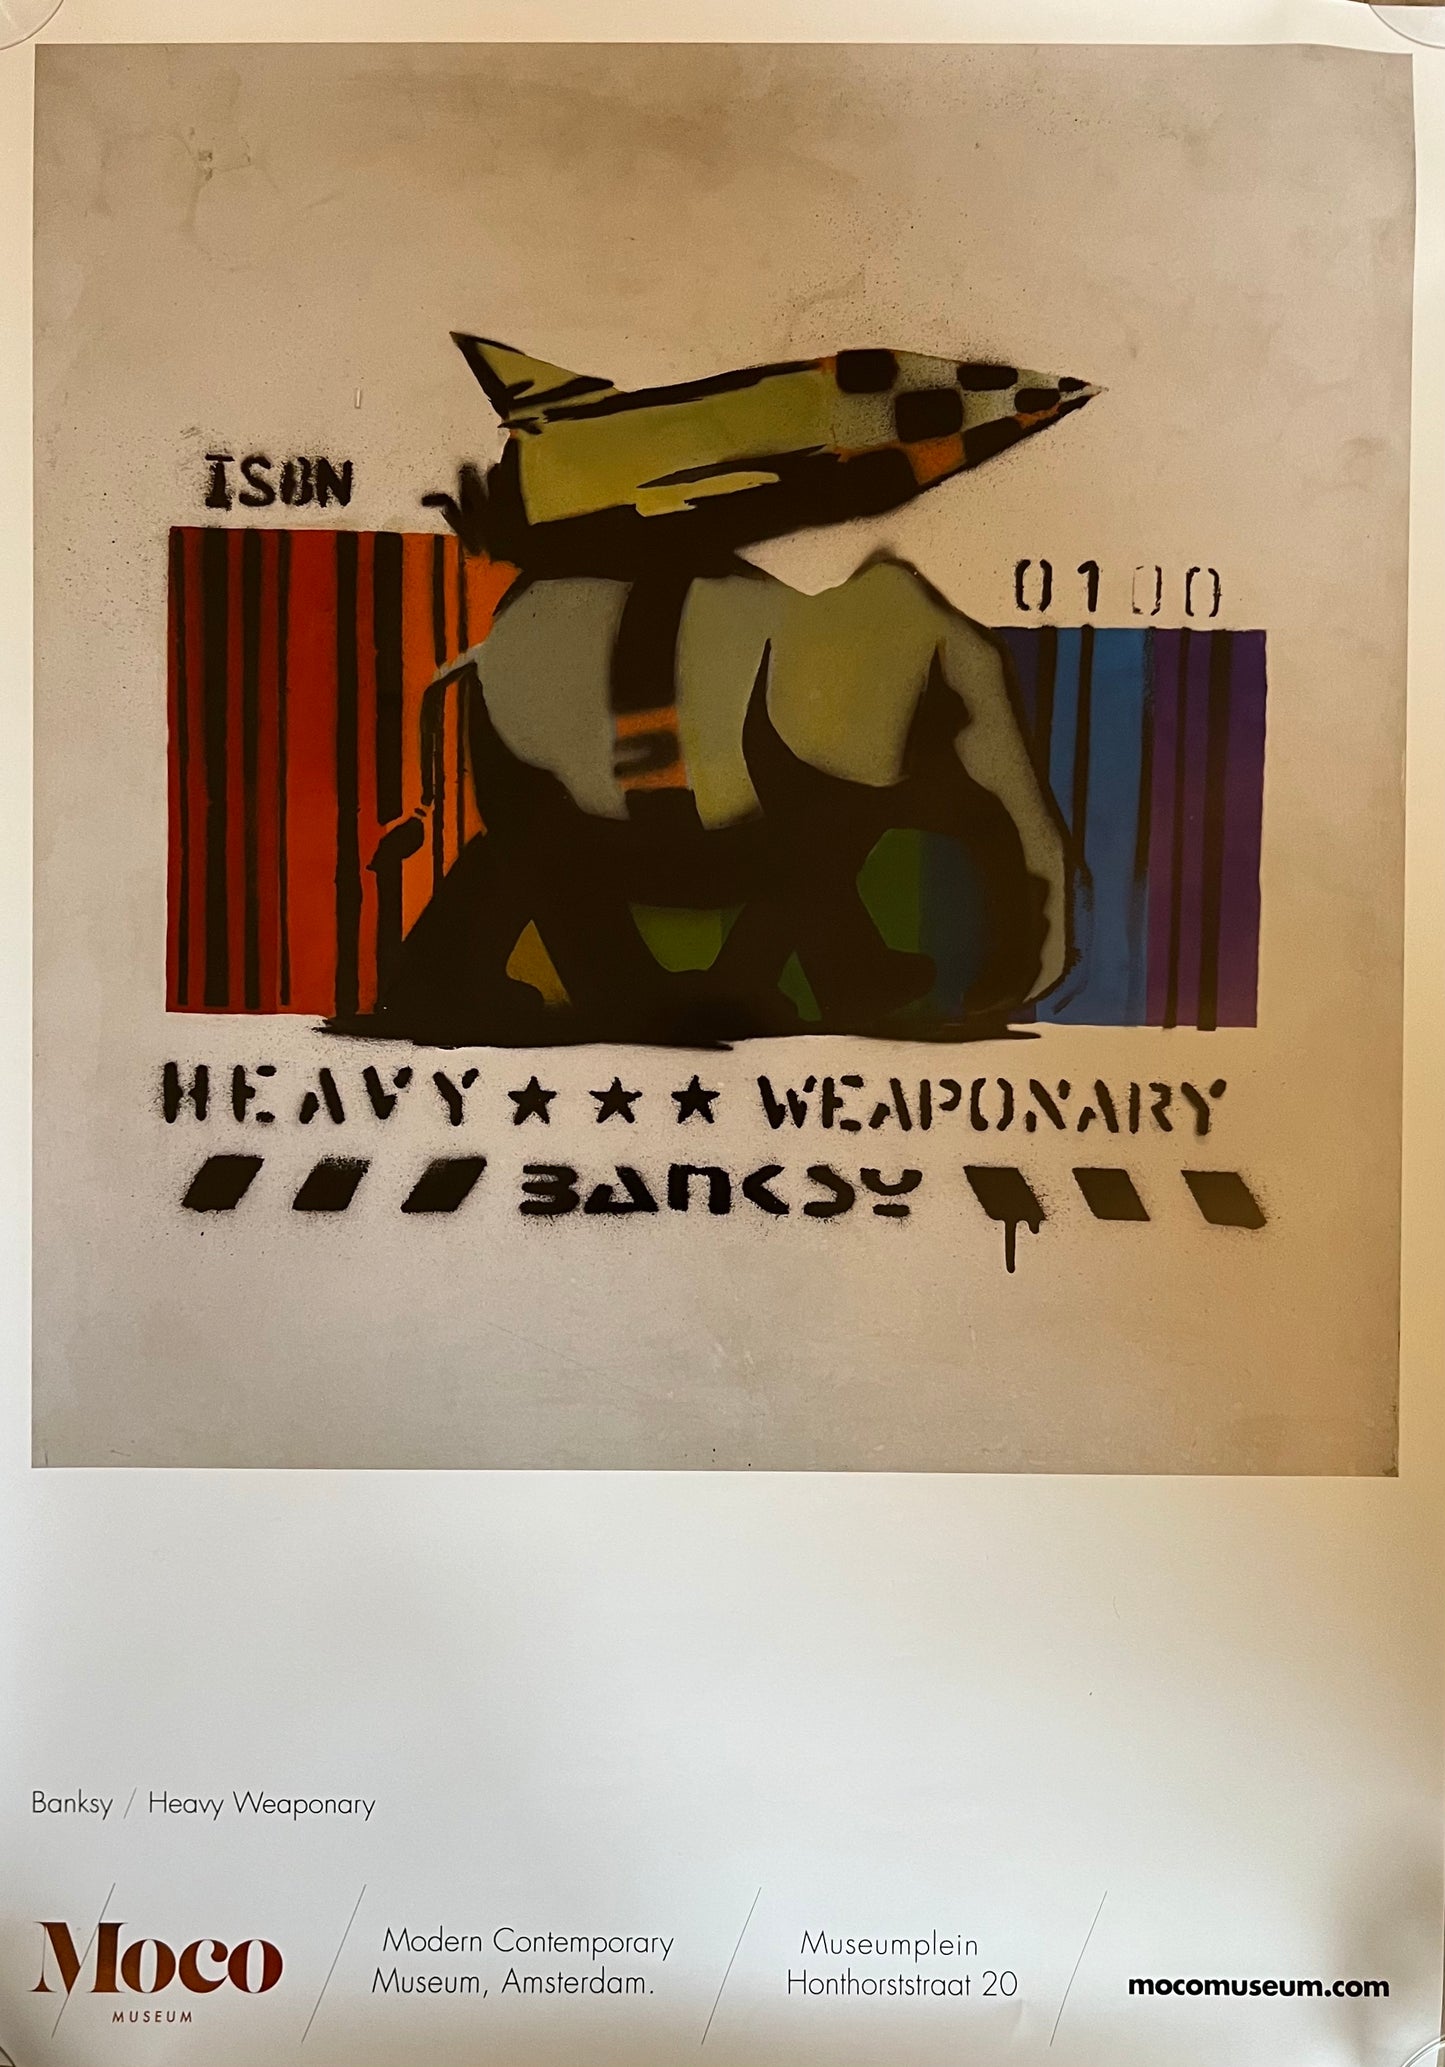 Official Poster - Banksy, Heavy Weaponary, MocoMuseum (Edition strictement limitée) - 2019